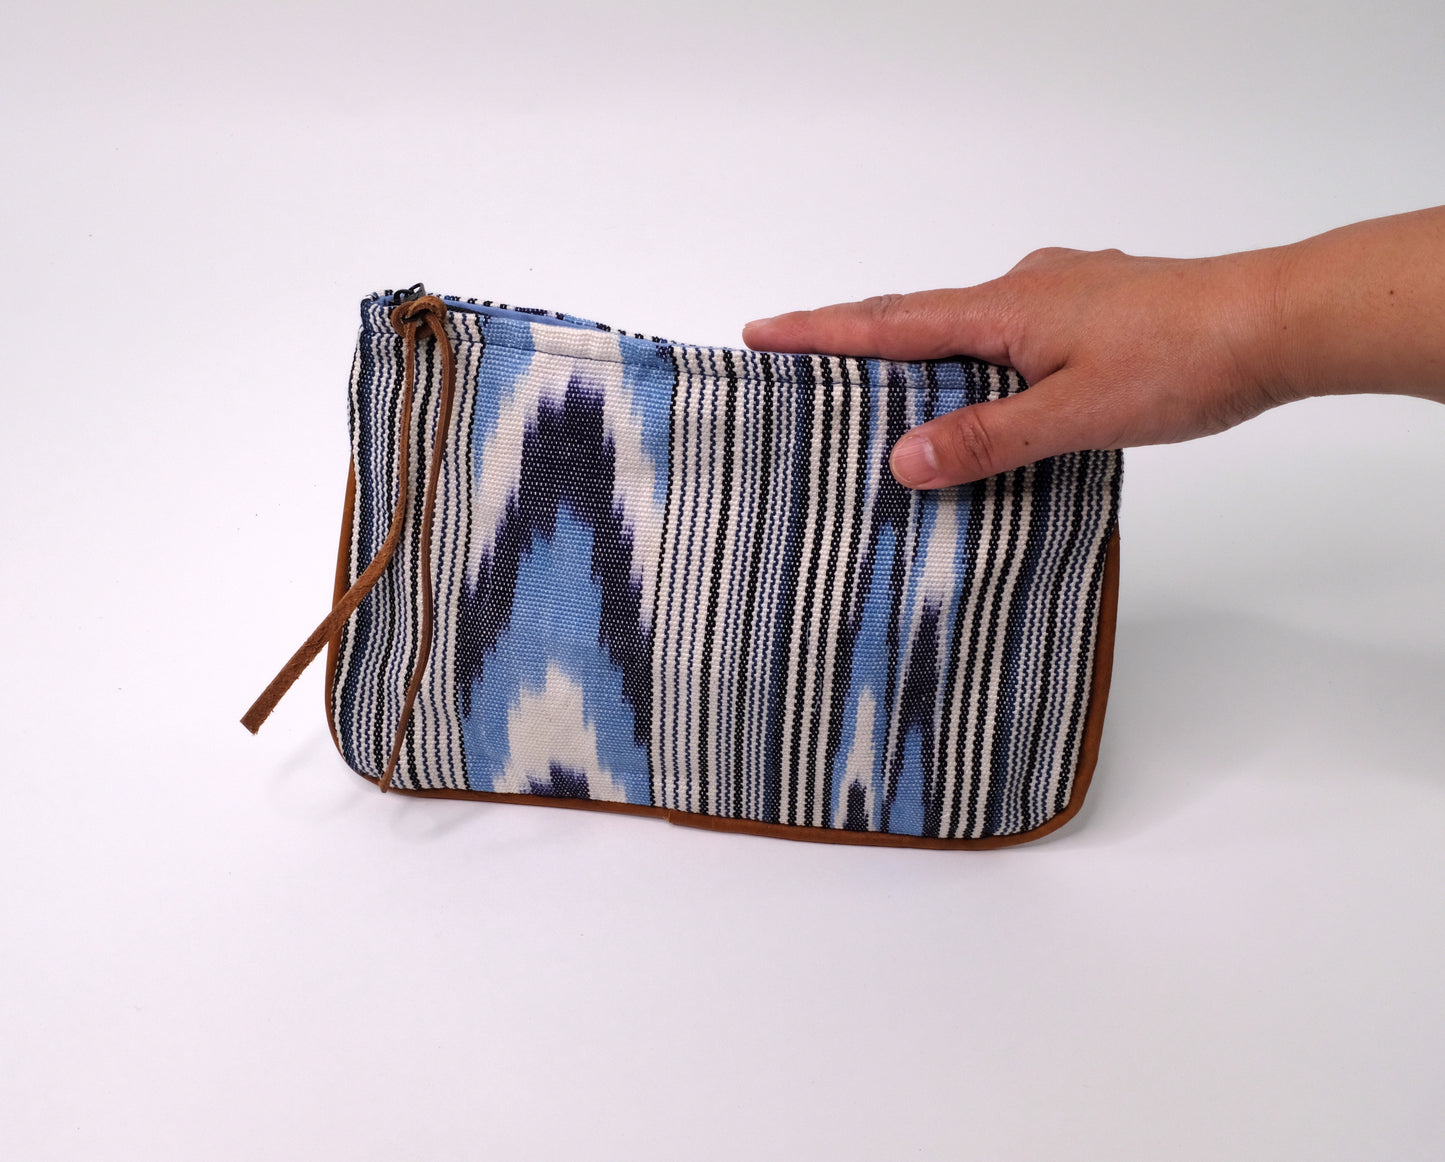 Handwoven Cosmetic Purse crafted from cotton and leather with light blue pattern.